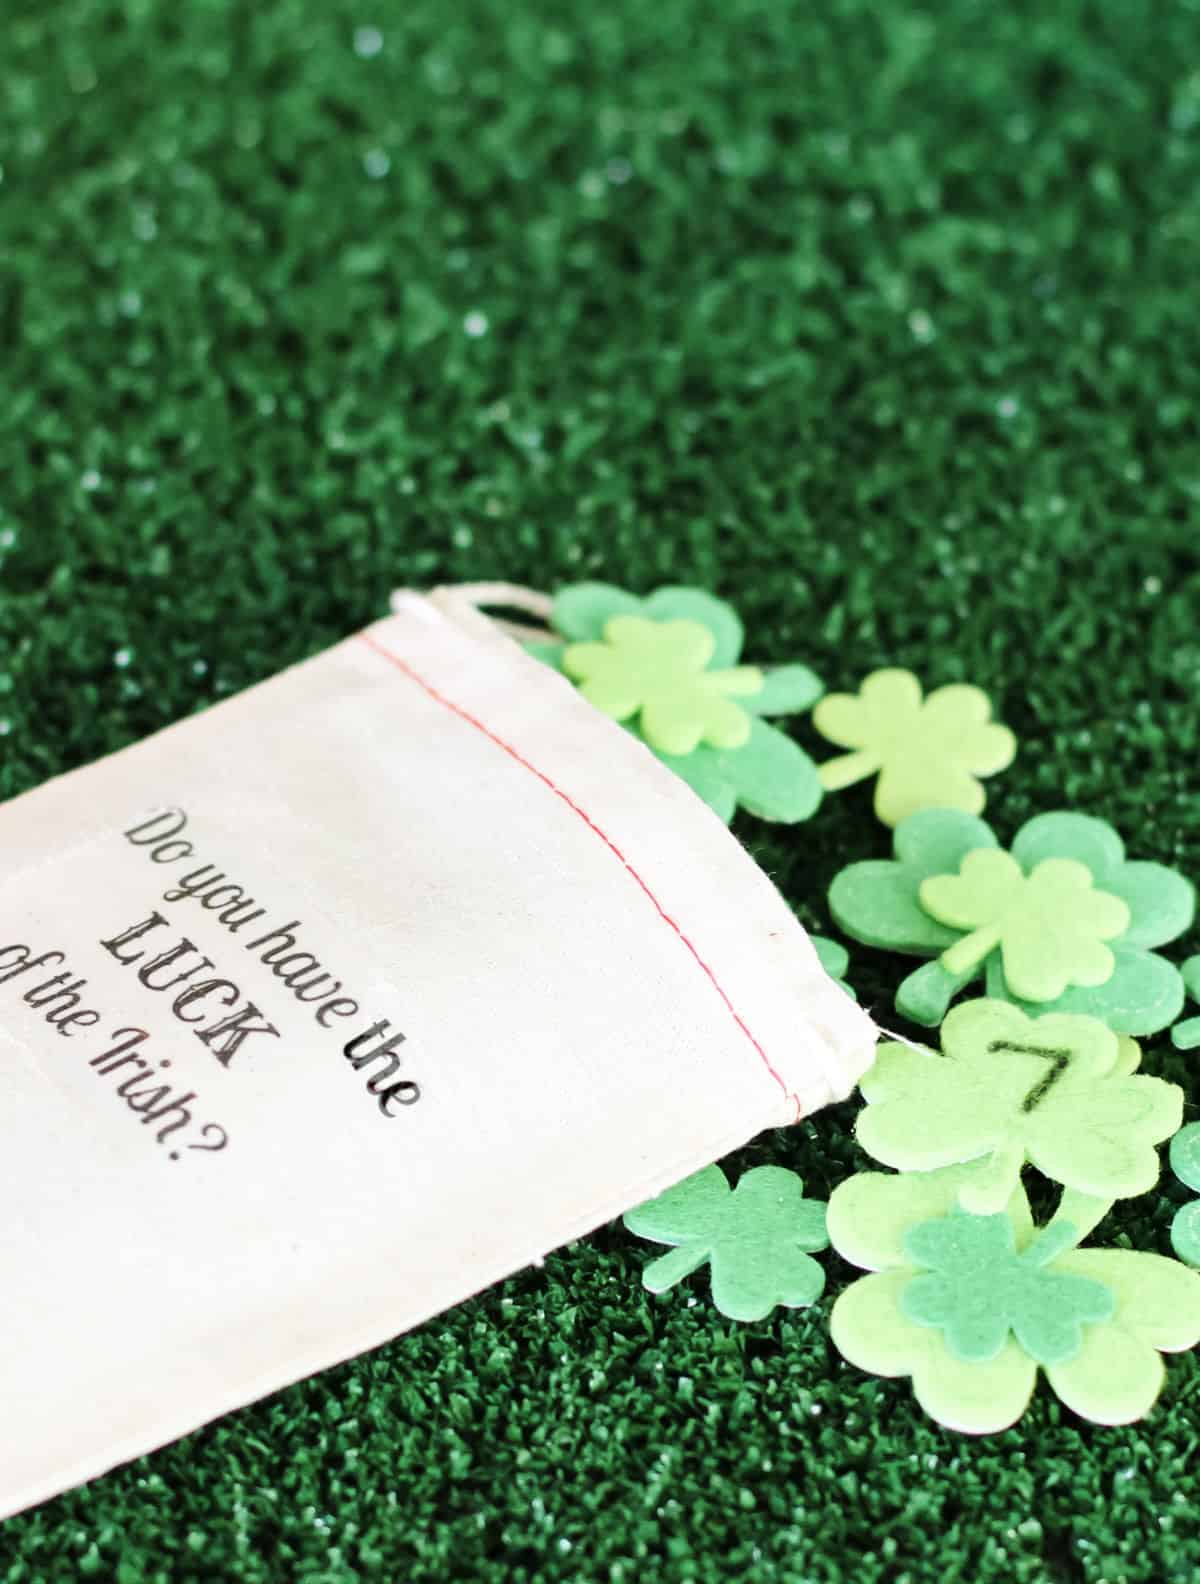 St. Patrick’s Day “Lucky Number” Game